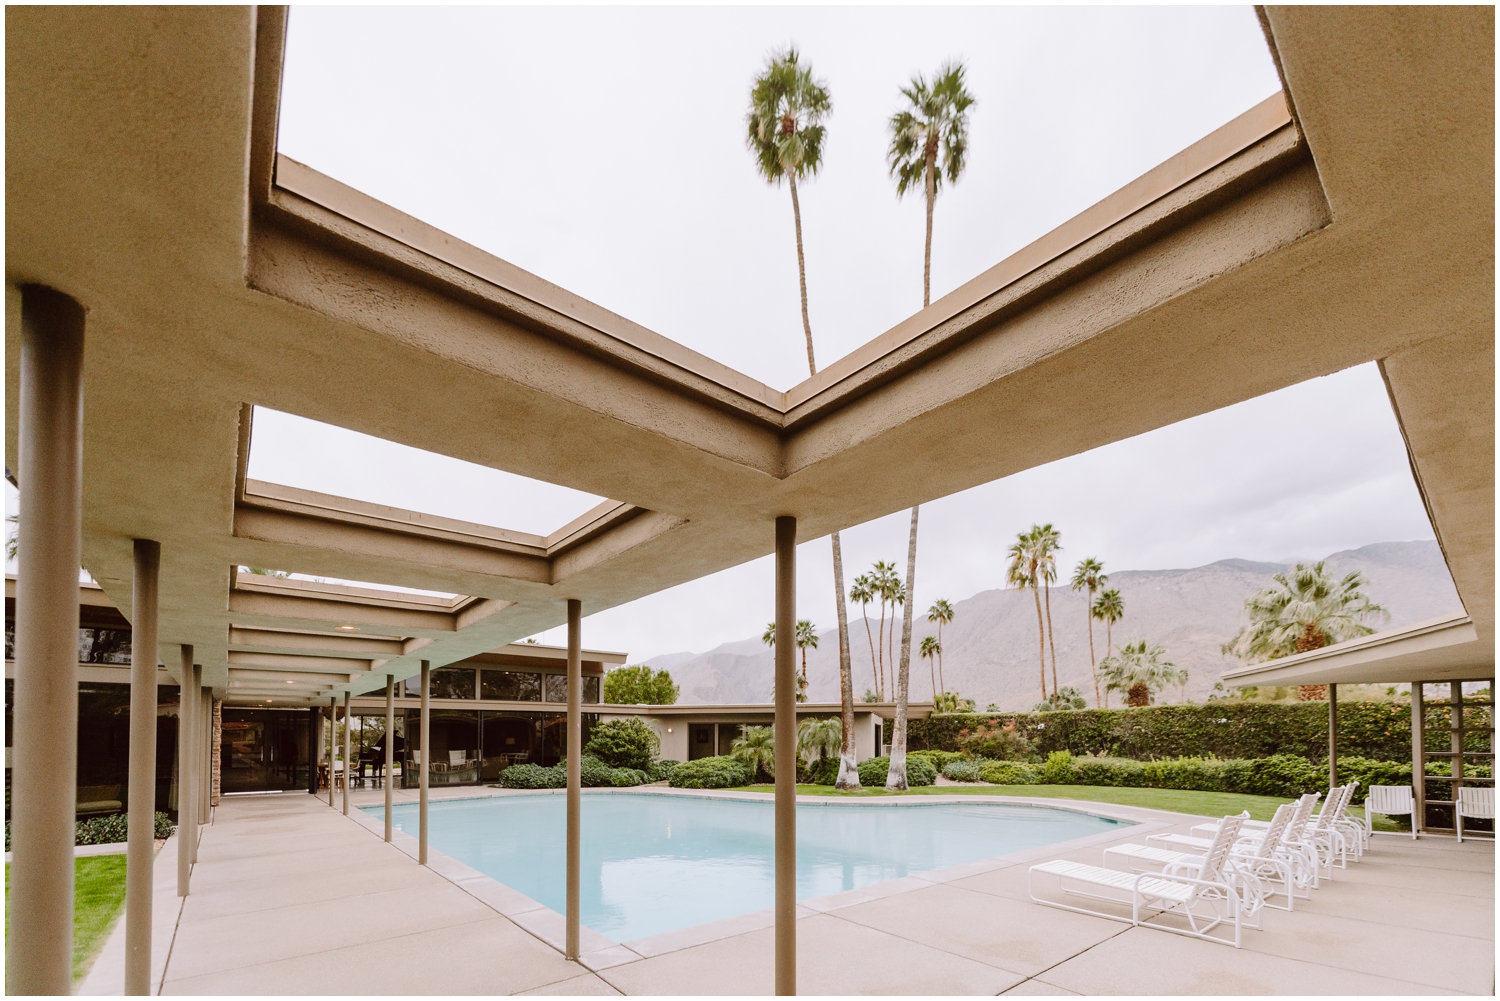 twin palms in palm springs wedding venue